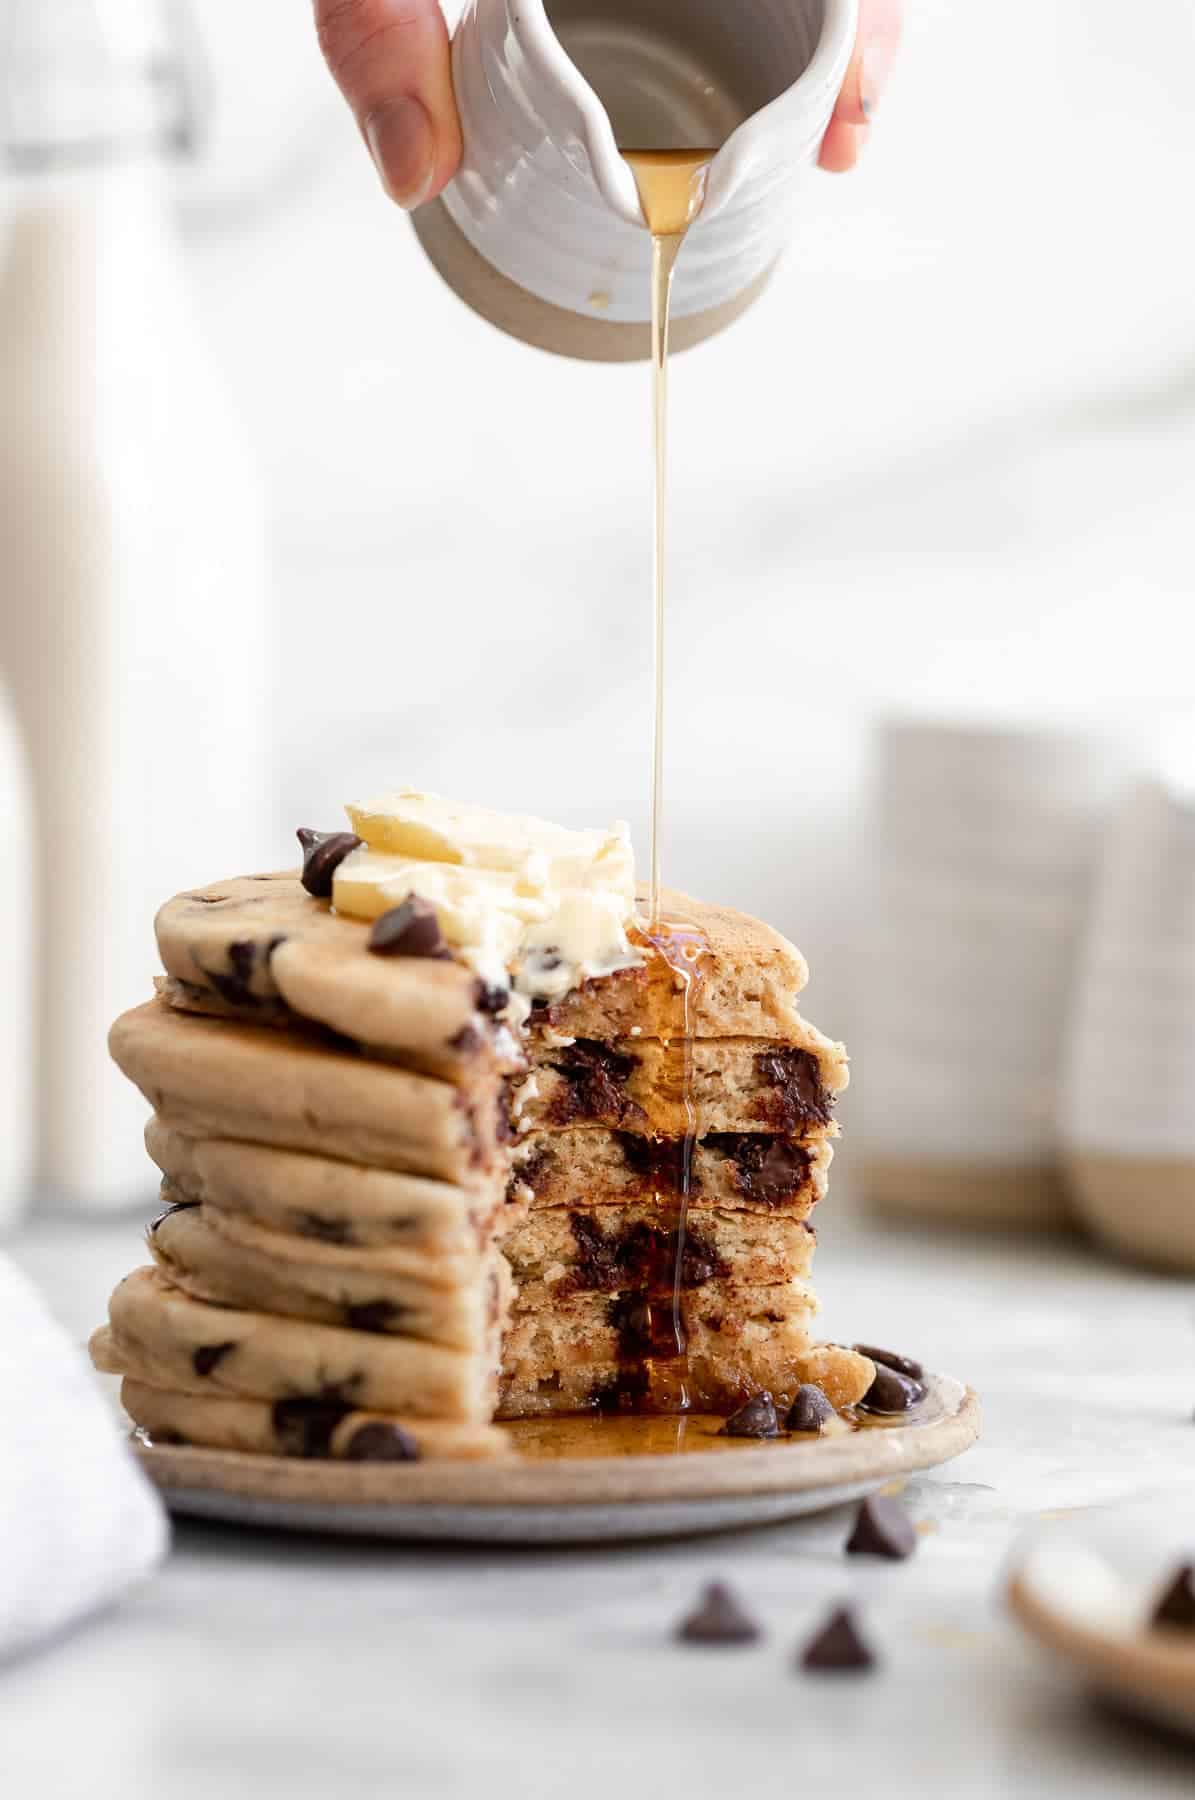 pouring maple syrup on top of the pancakes with a bite taken out